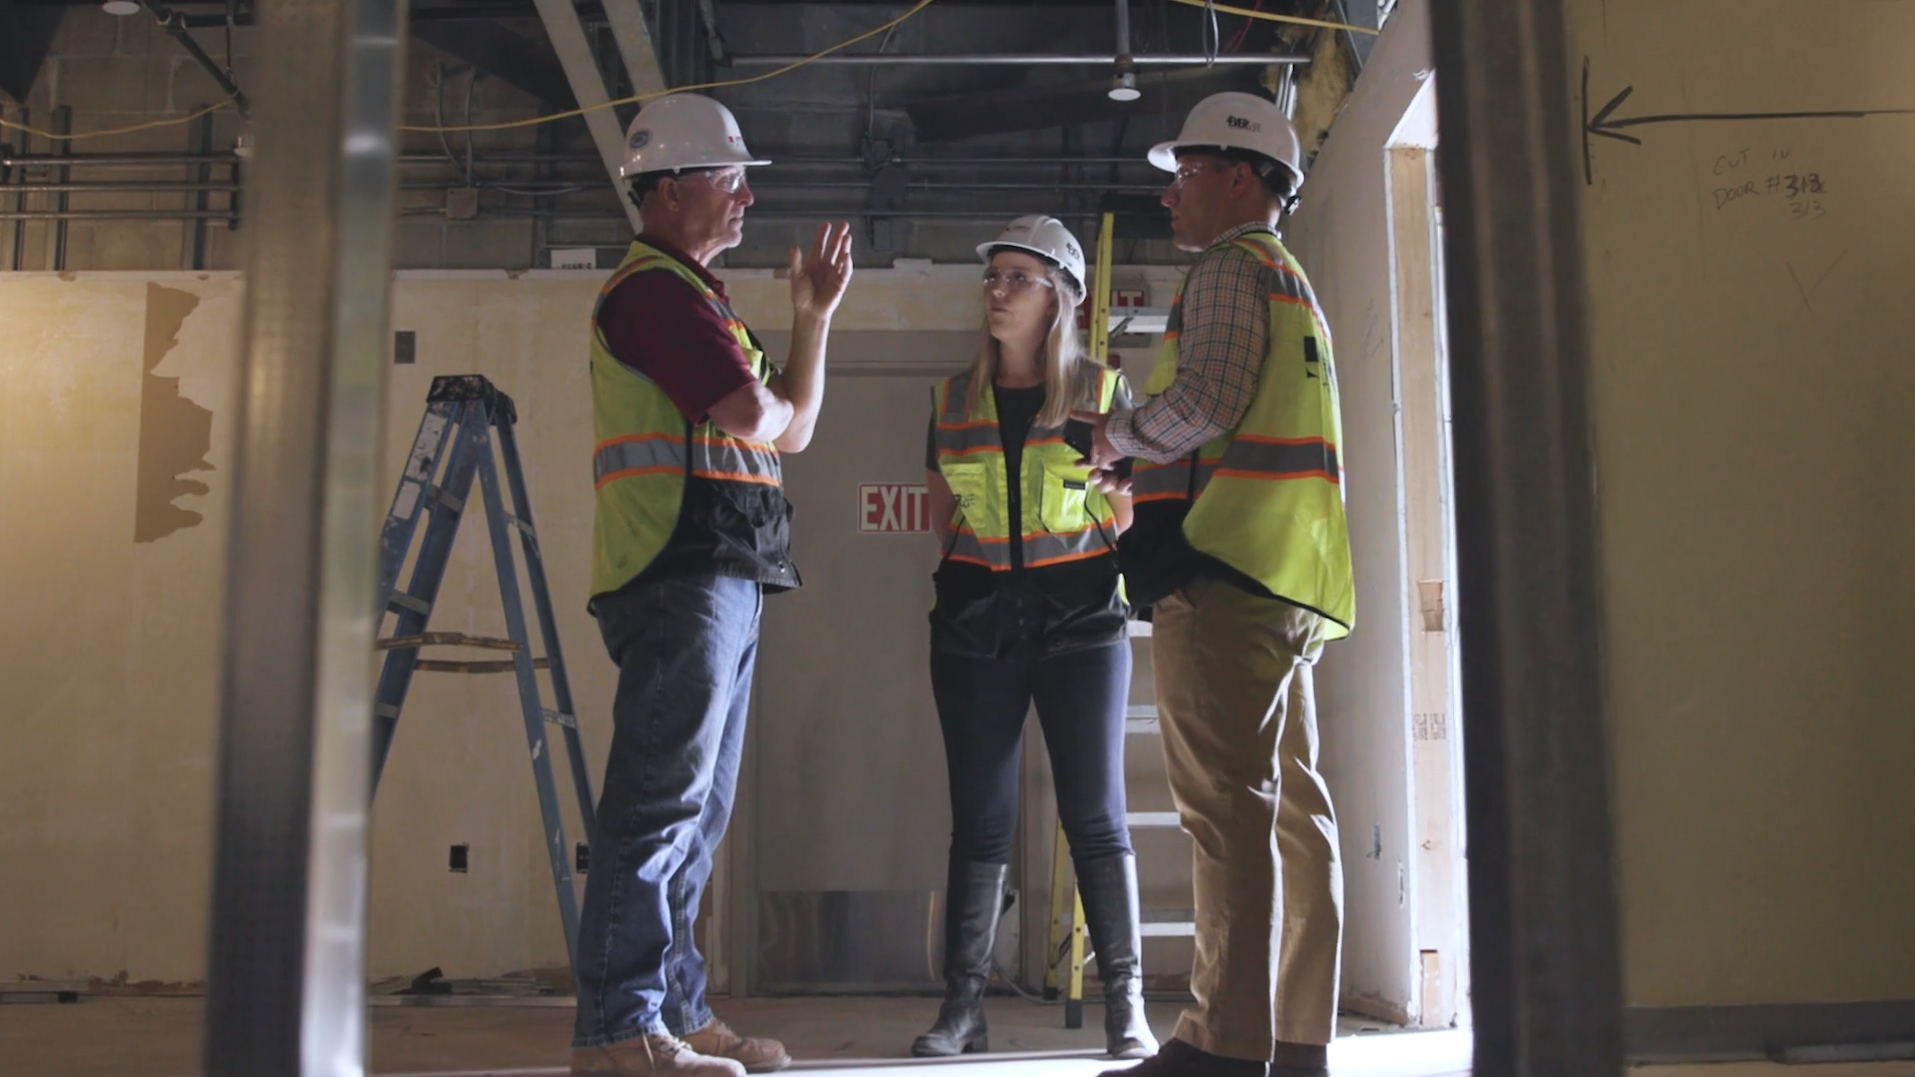 5 Reasons Why Girls and Women Should Consider a Career in Construction